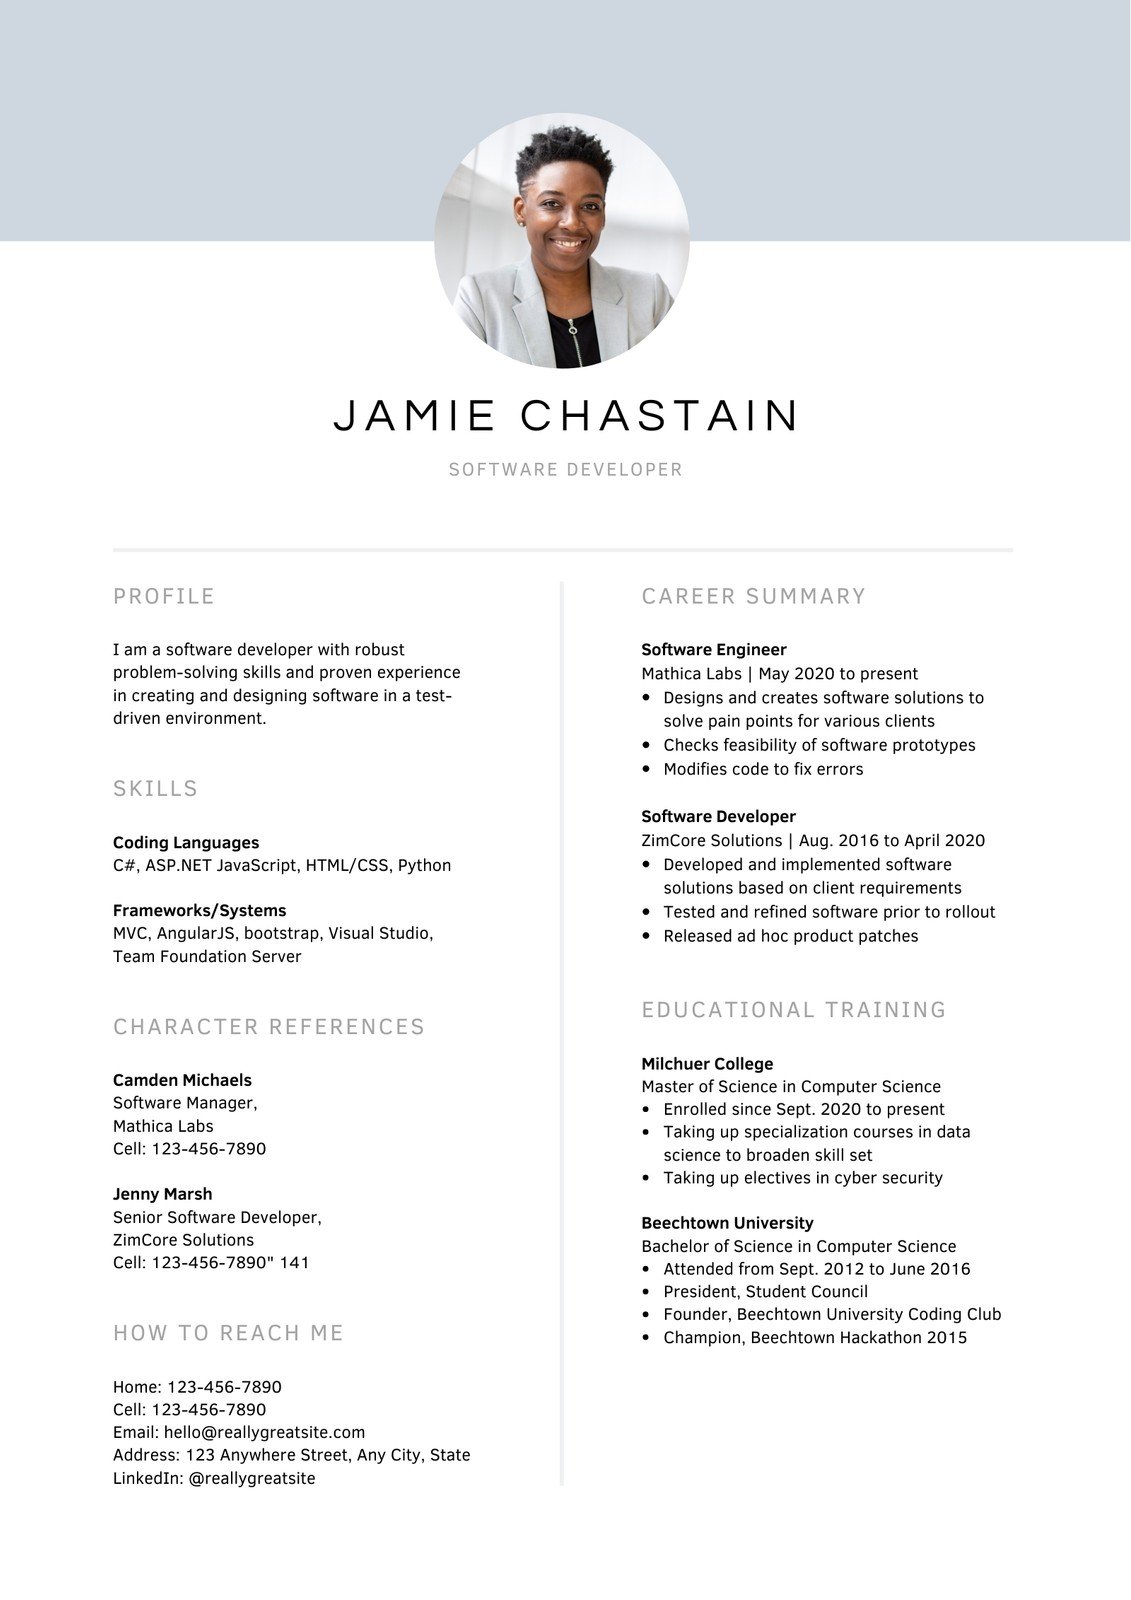 Resume canva Is Canva